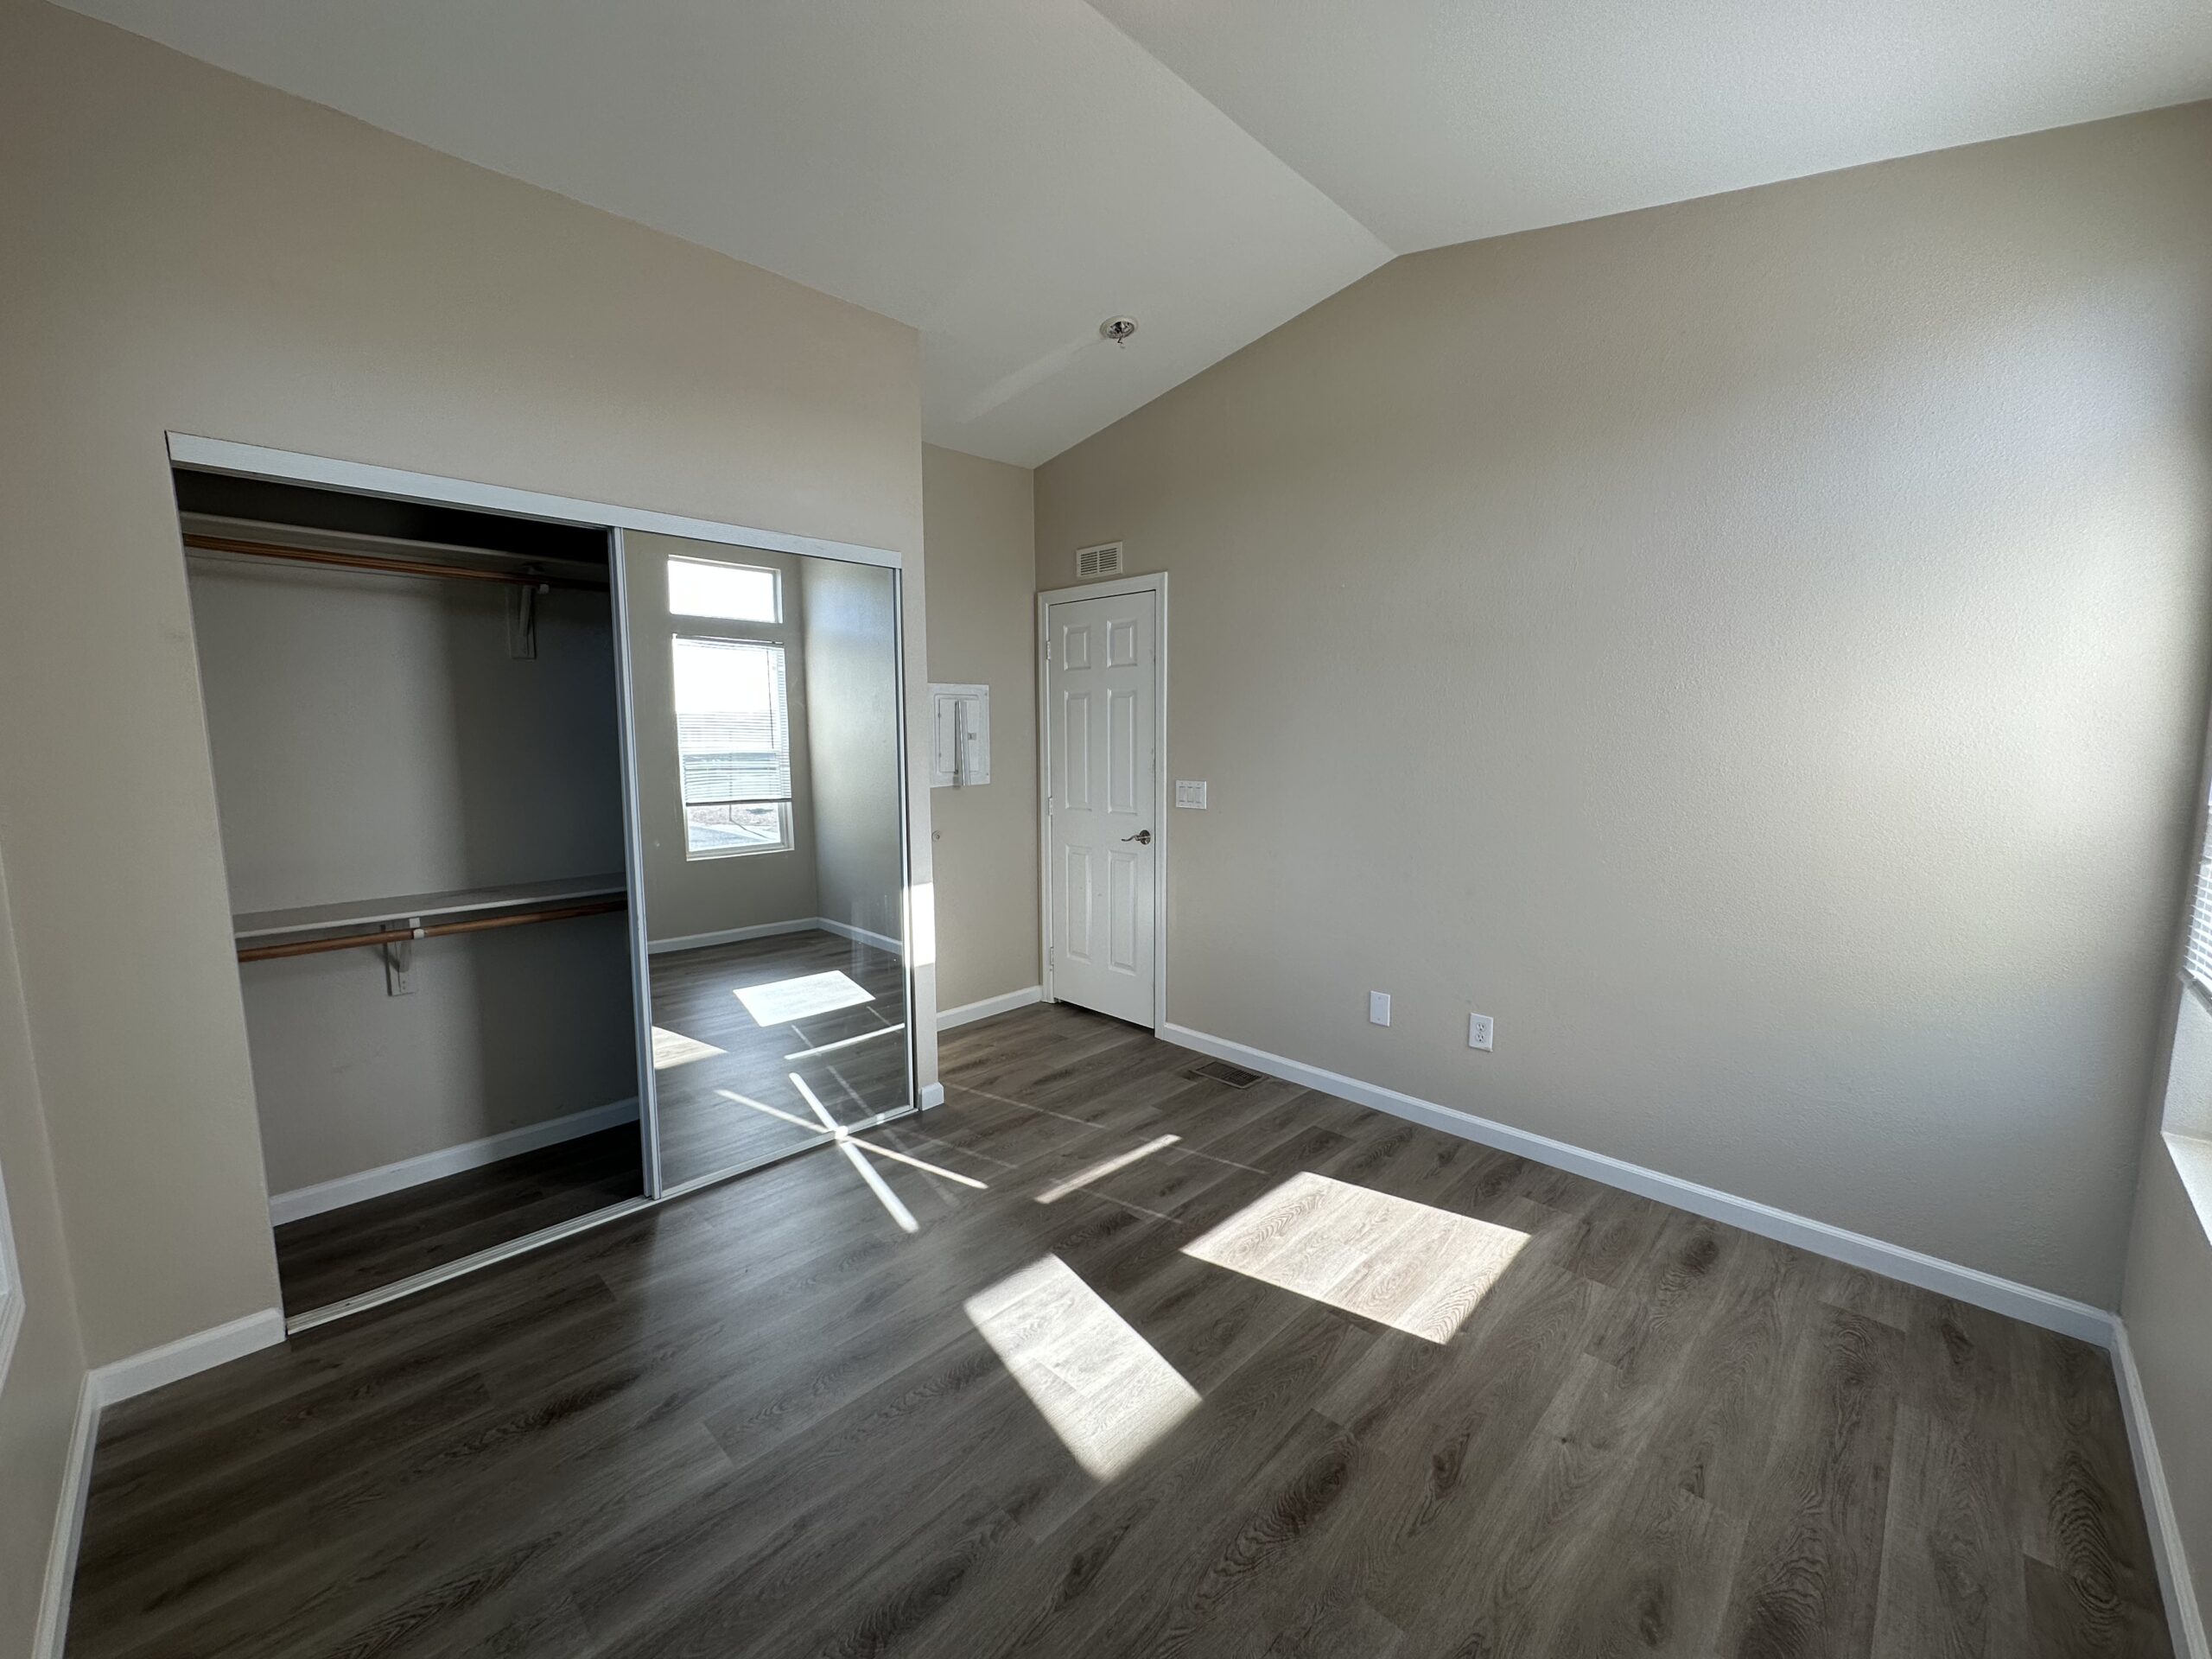 Empty room with an open closet, wood laminate flooring, and a single window casting sunlight on the walls and floor.